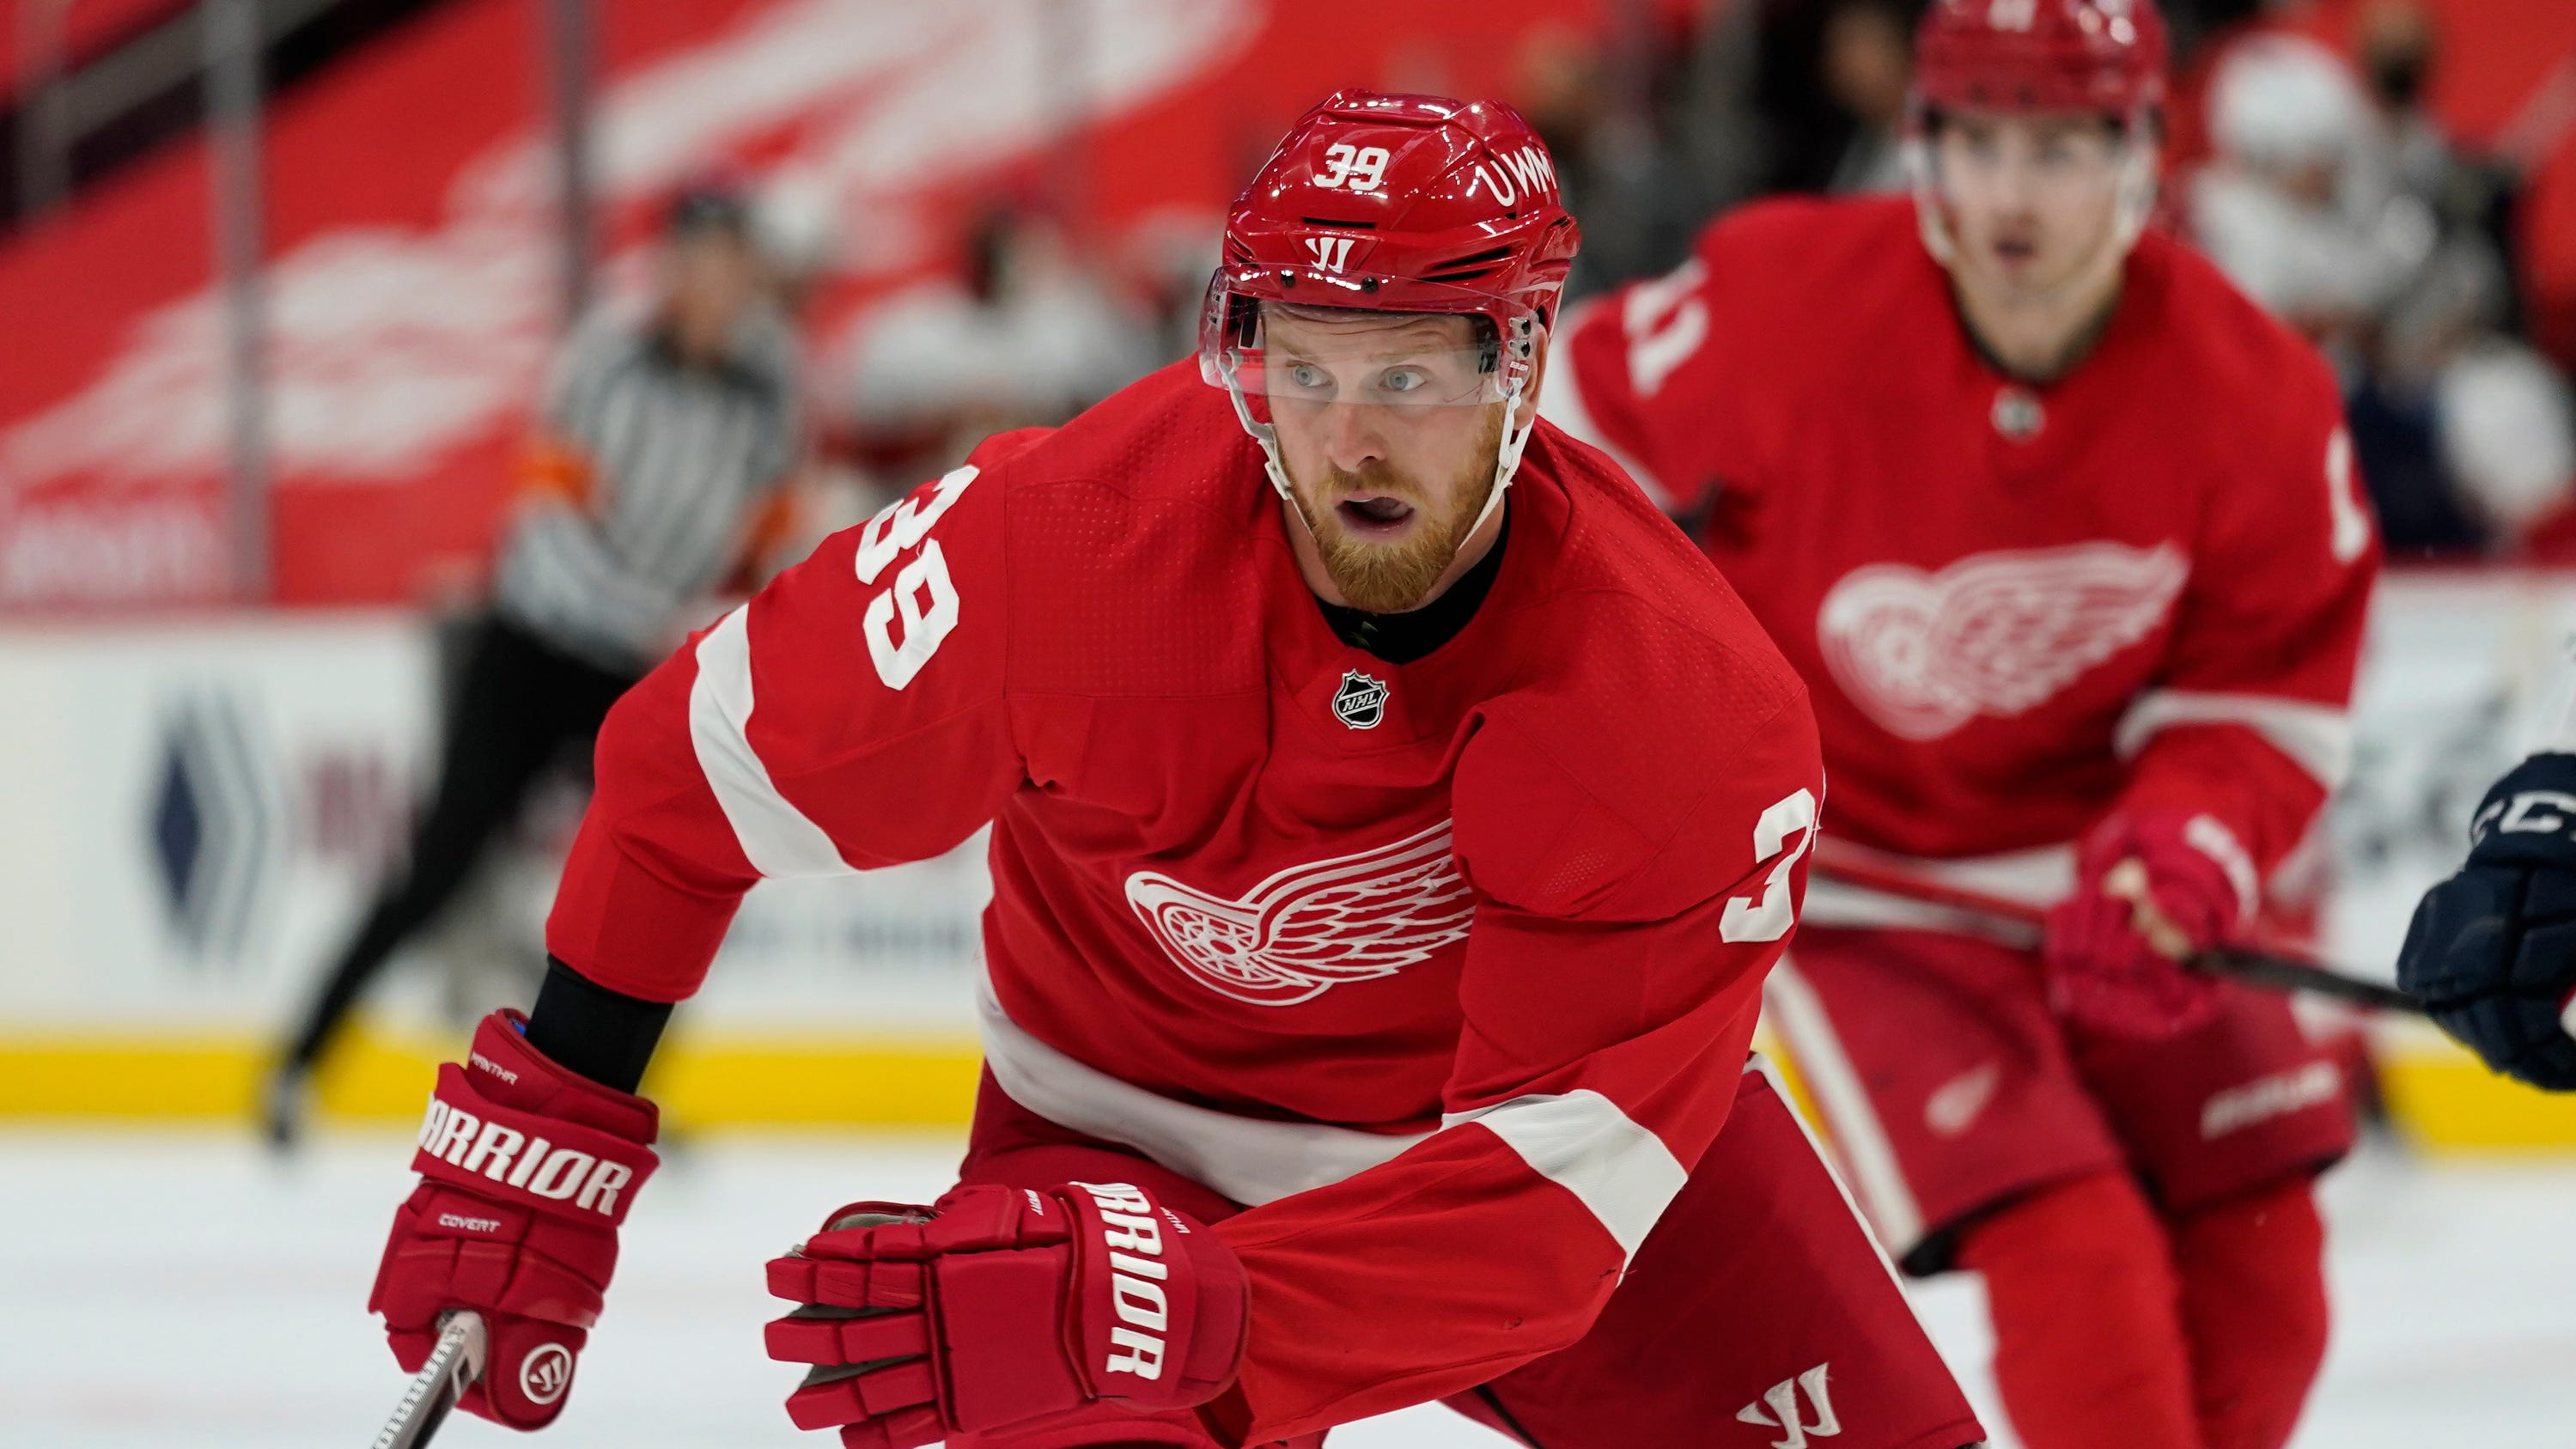 Anthony Mantha's inconsistent play and production were a maddening reminder of how far the Wings have to go to get back where they used to be.